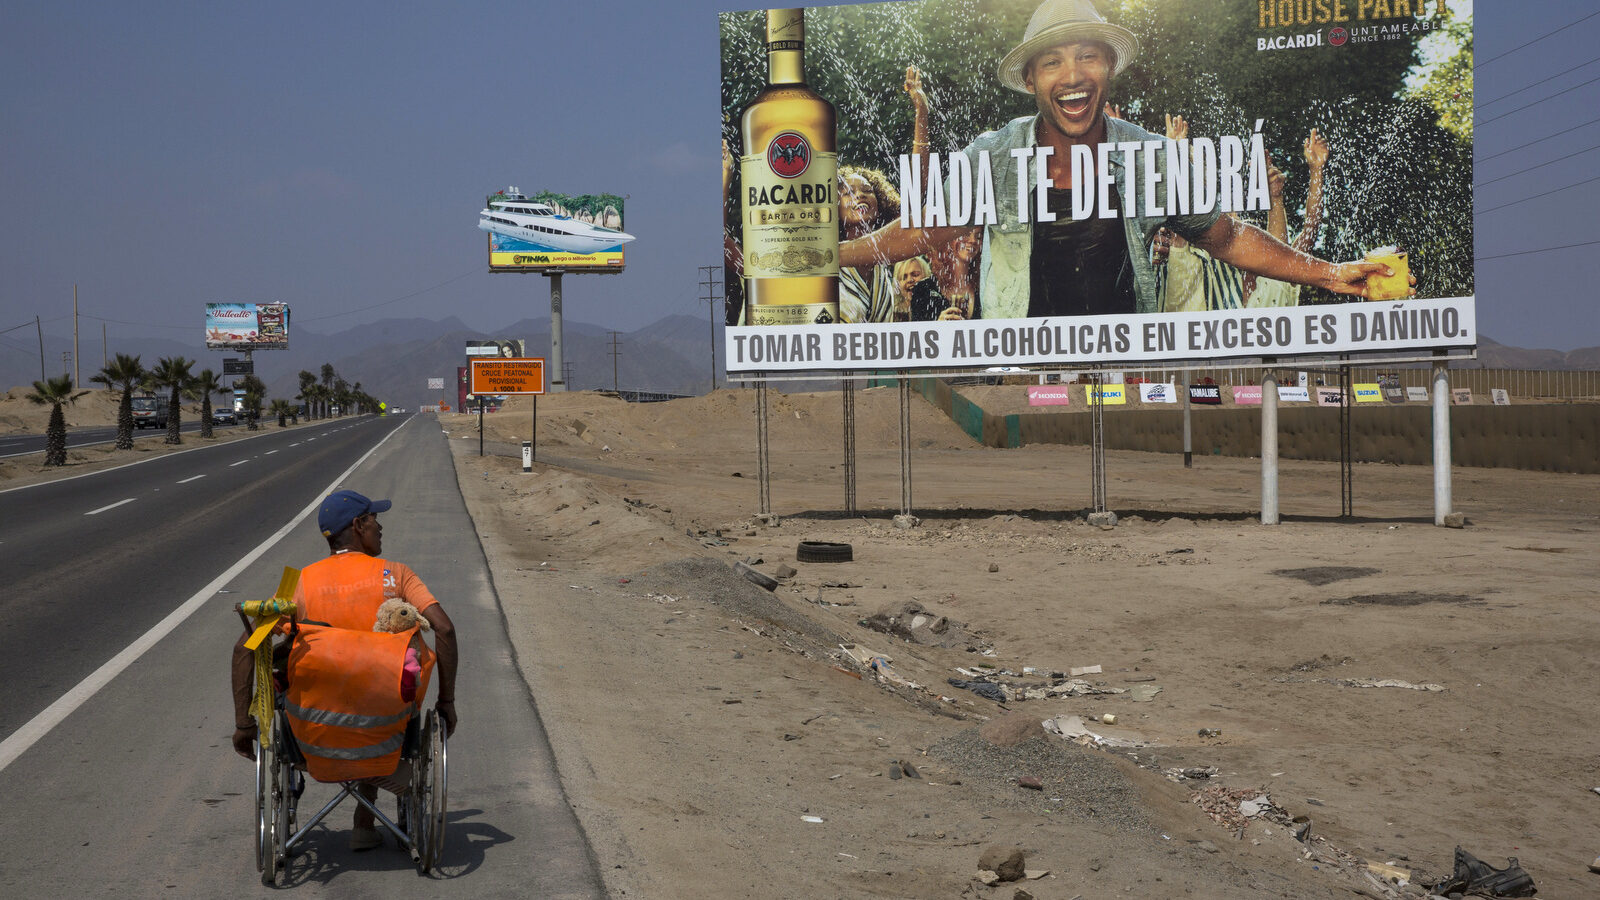 Jose Suarez, from Cucuta, Colombia, moves his wheelchair, decorated with a stuffed animal, along the Pan American Highway lined with billboards advertising rum, lottery and mixed nuts, on the south side of Lima, Peru. Suarez, 58, said he's on a mission to reach Brazil in his wheelchair, after leaving Cucuta in January. The billboard reads in Spanish "Nothing will stop you." (AP/Rodrigo Abd)